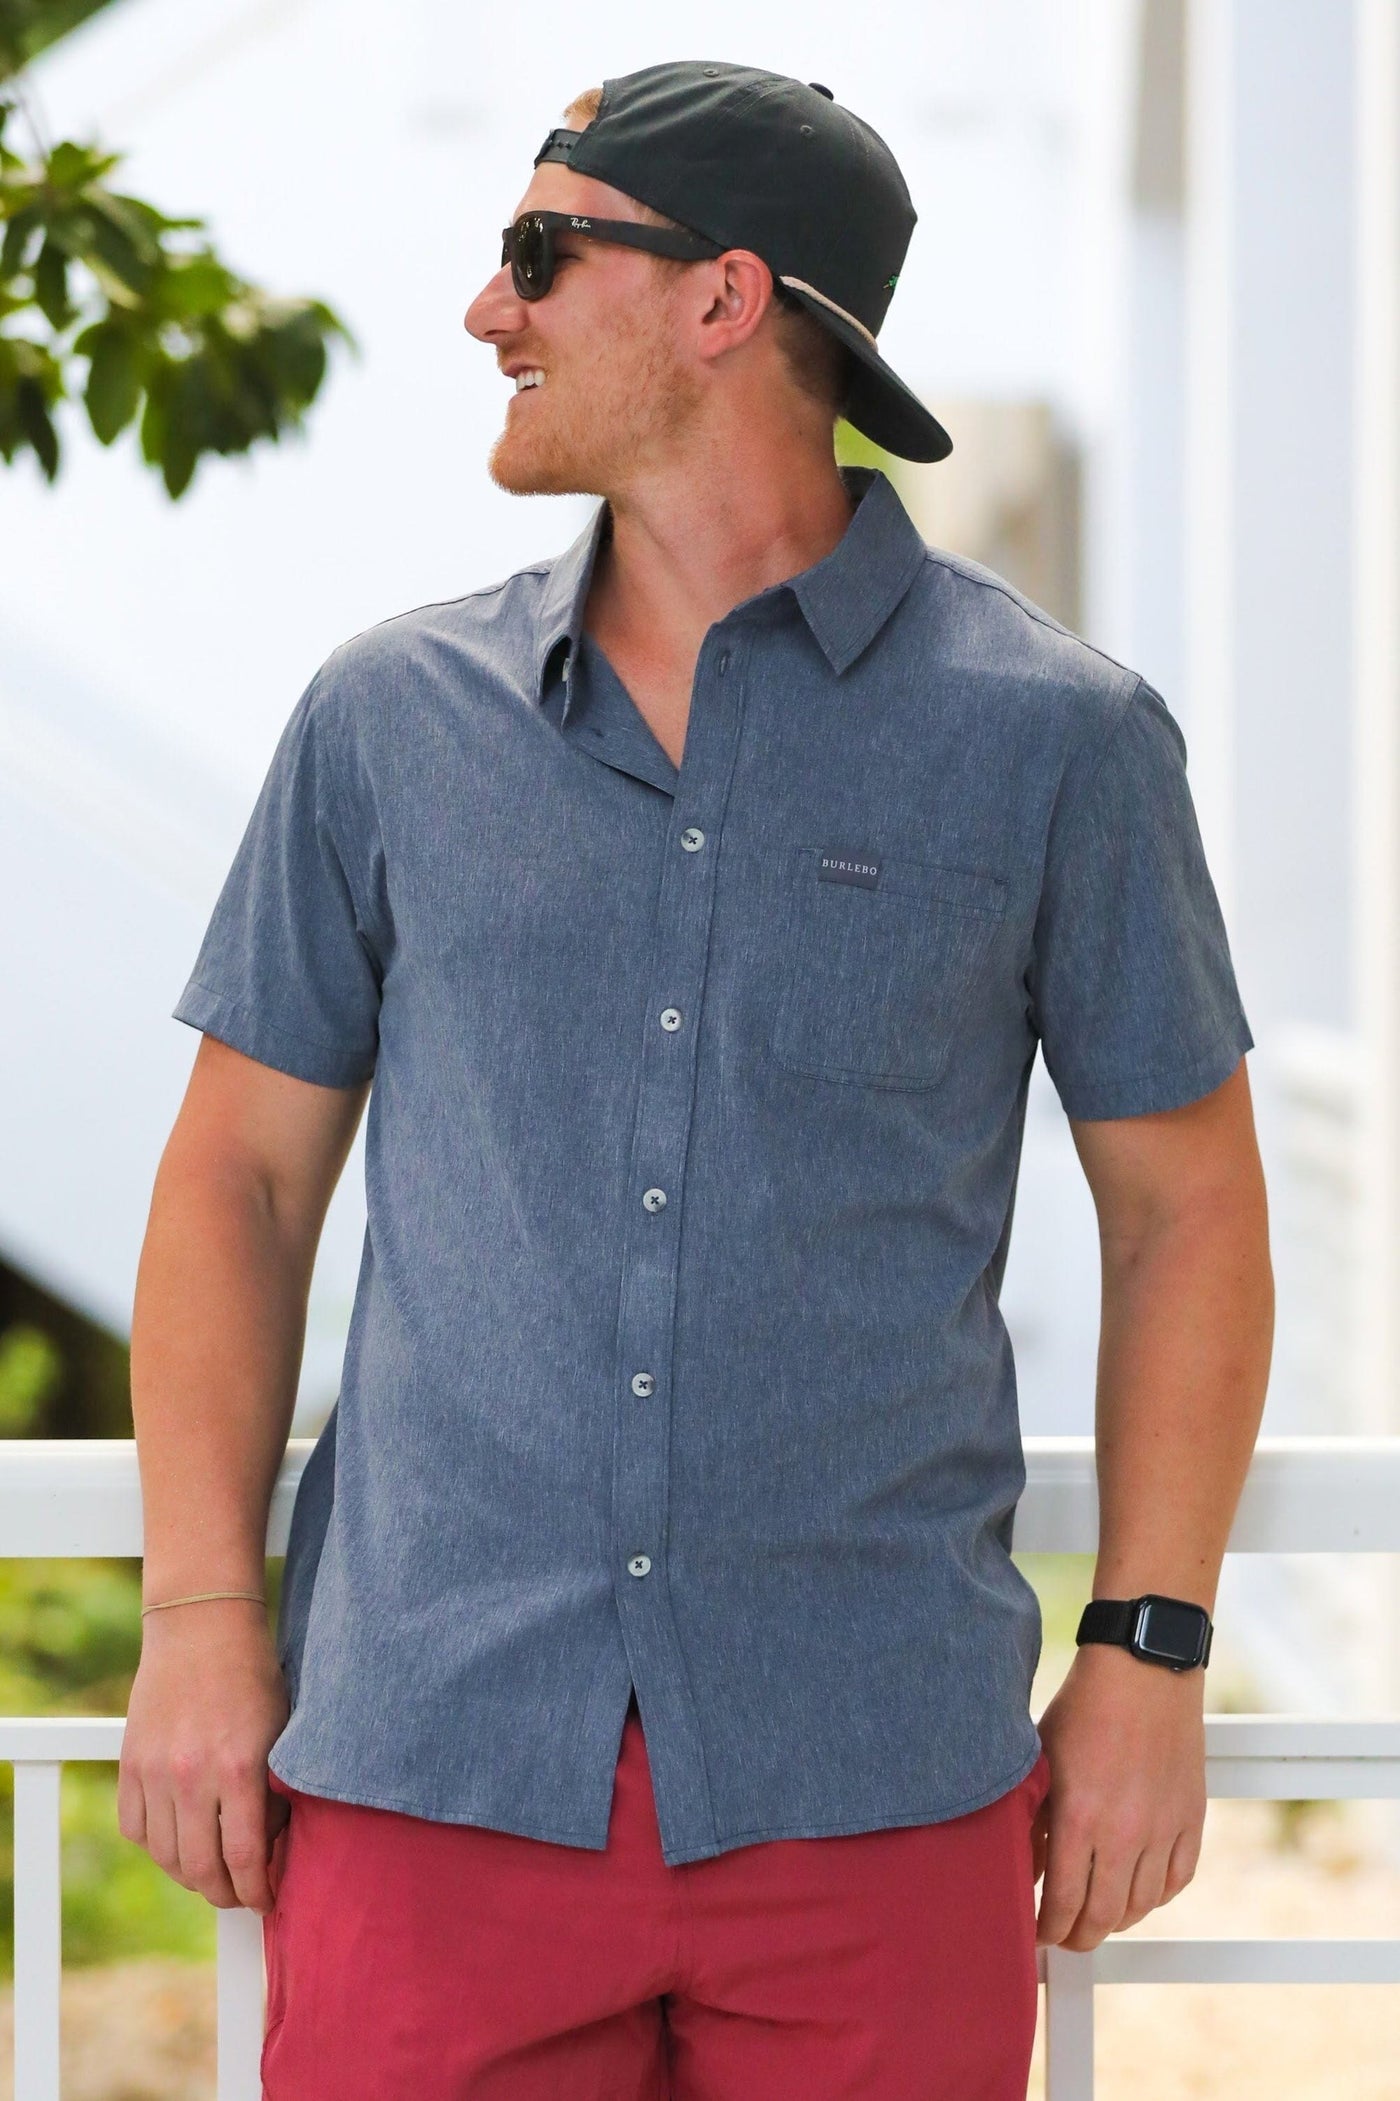 PERF BUTTON UP - DK HEATHER GRAY